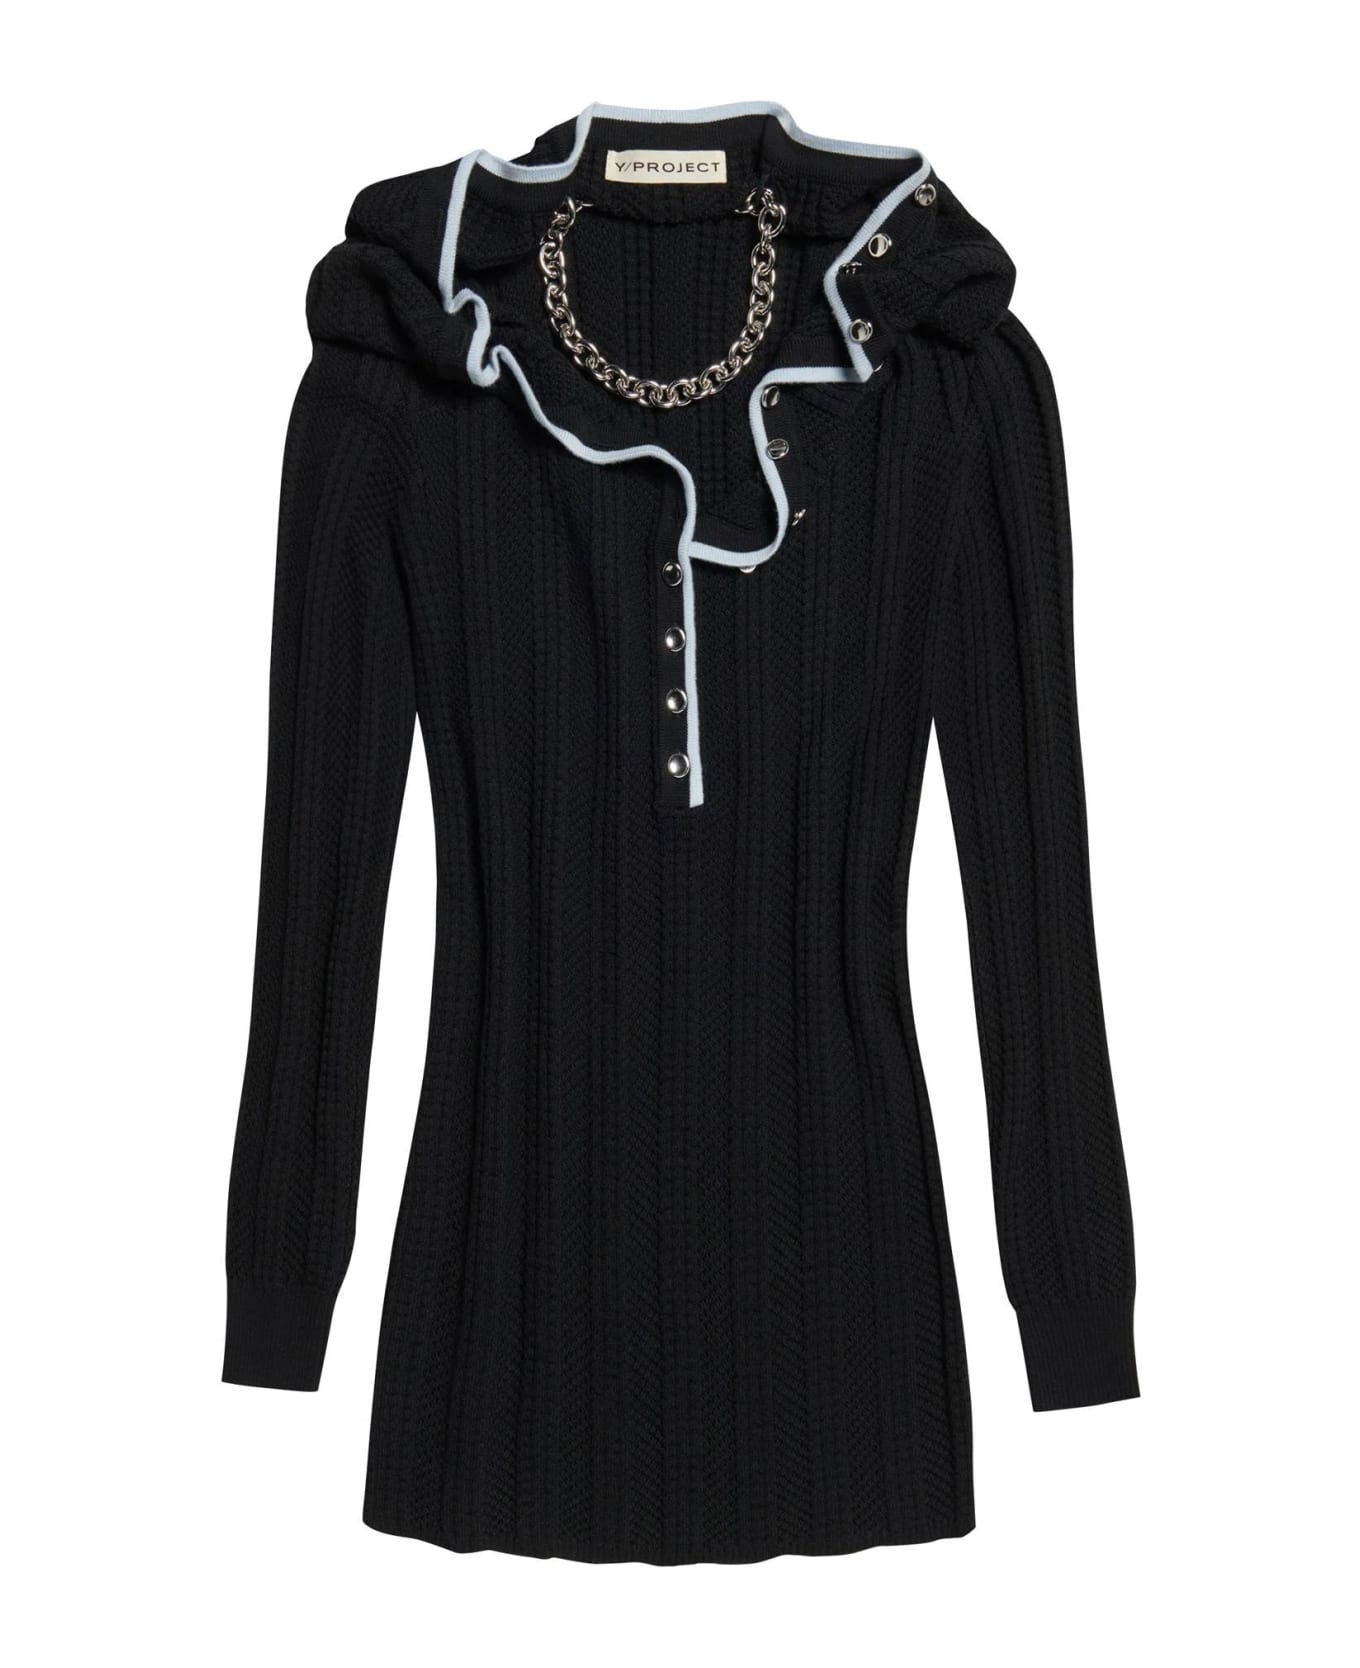 Y/Project Merino Wool Dress With Necklace - EVERGREEN BLACK (Black) ニットウェア